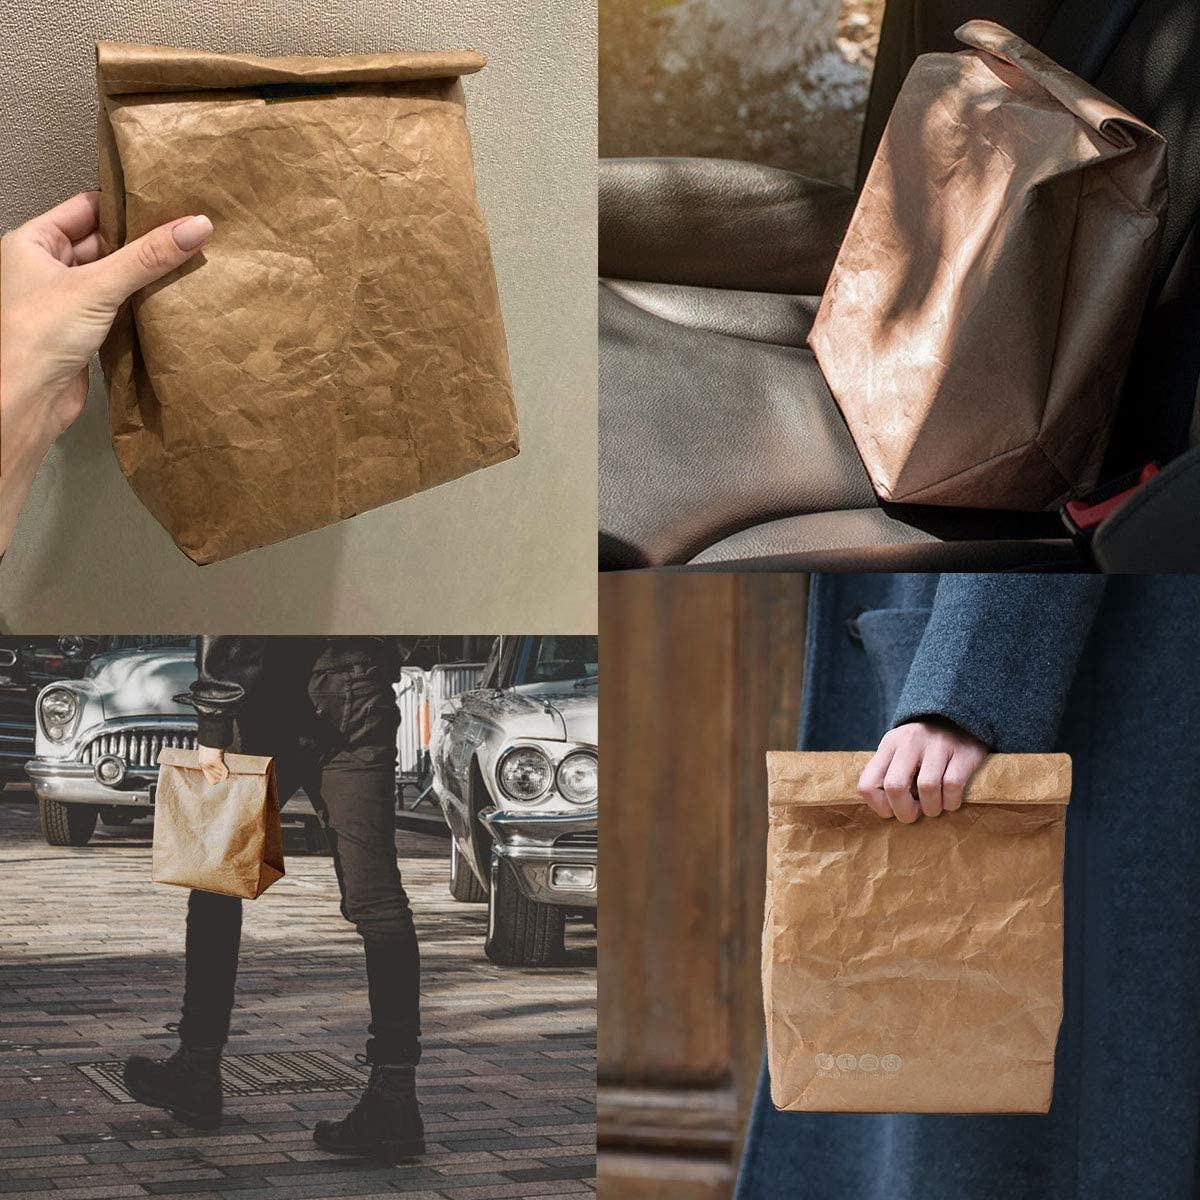  Reusable Freezable Brown Paper Snack bags 